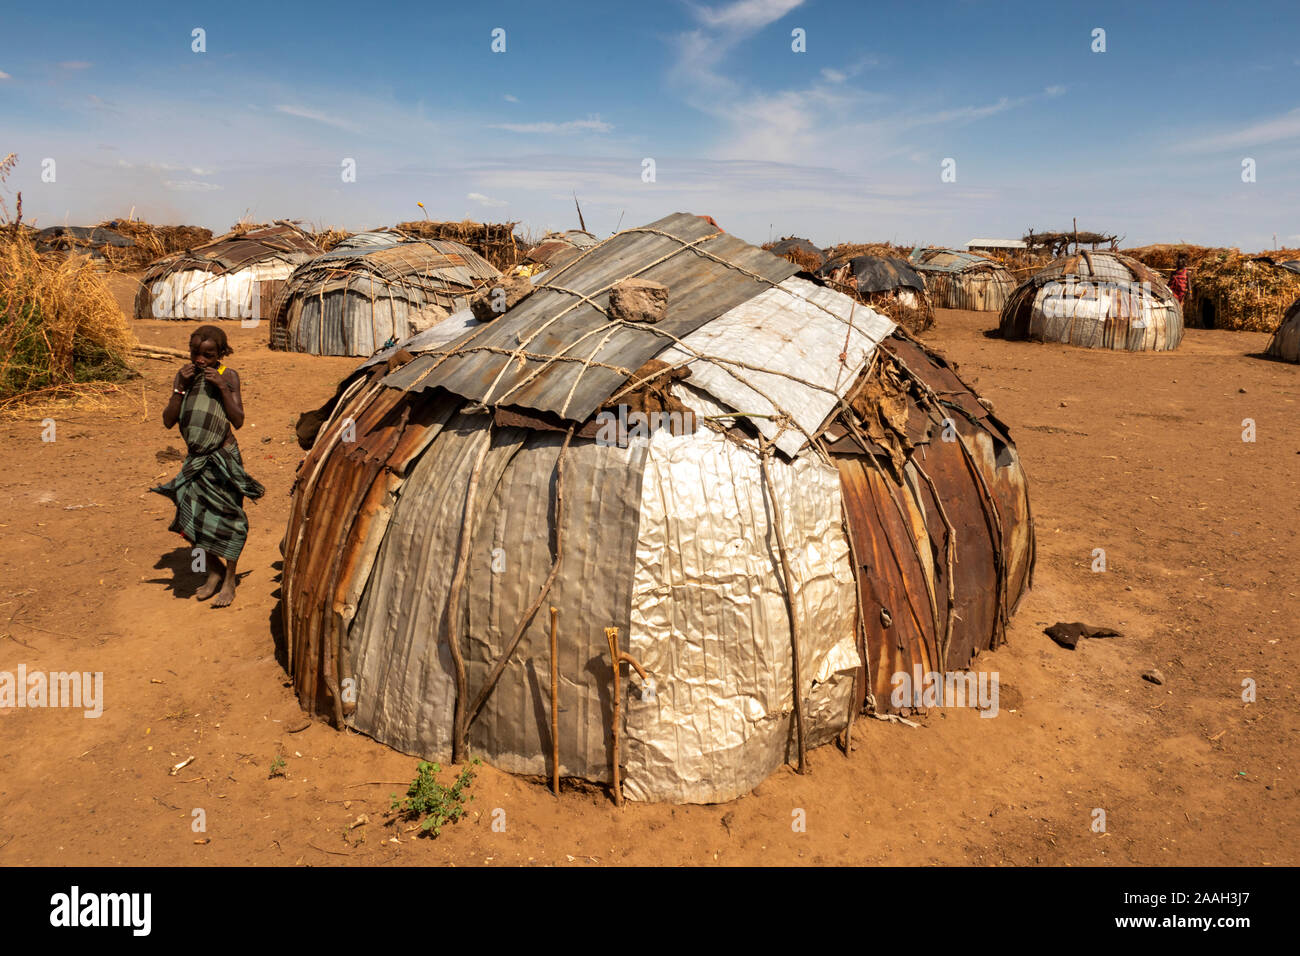 Ethiopia, South Omo, Omorate, Dasenech village, near Kenyan border, Dasenech tribal house made from found materials and metal sheets Stock Photo